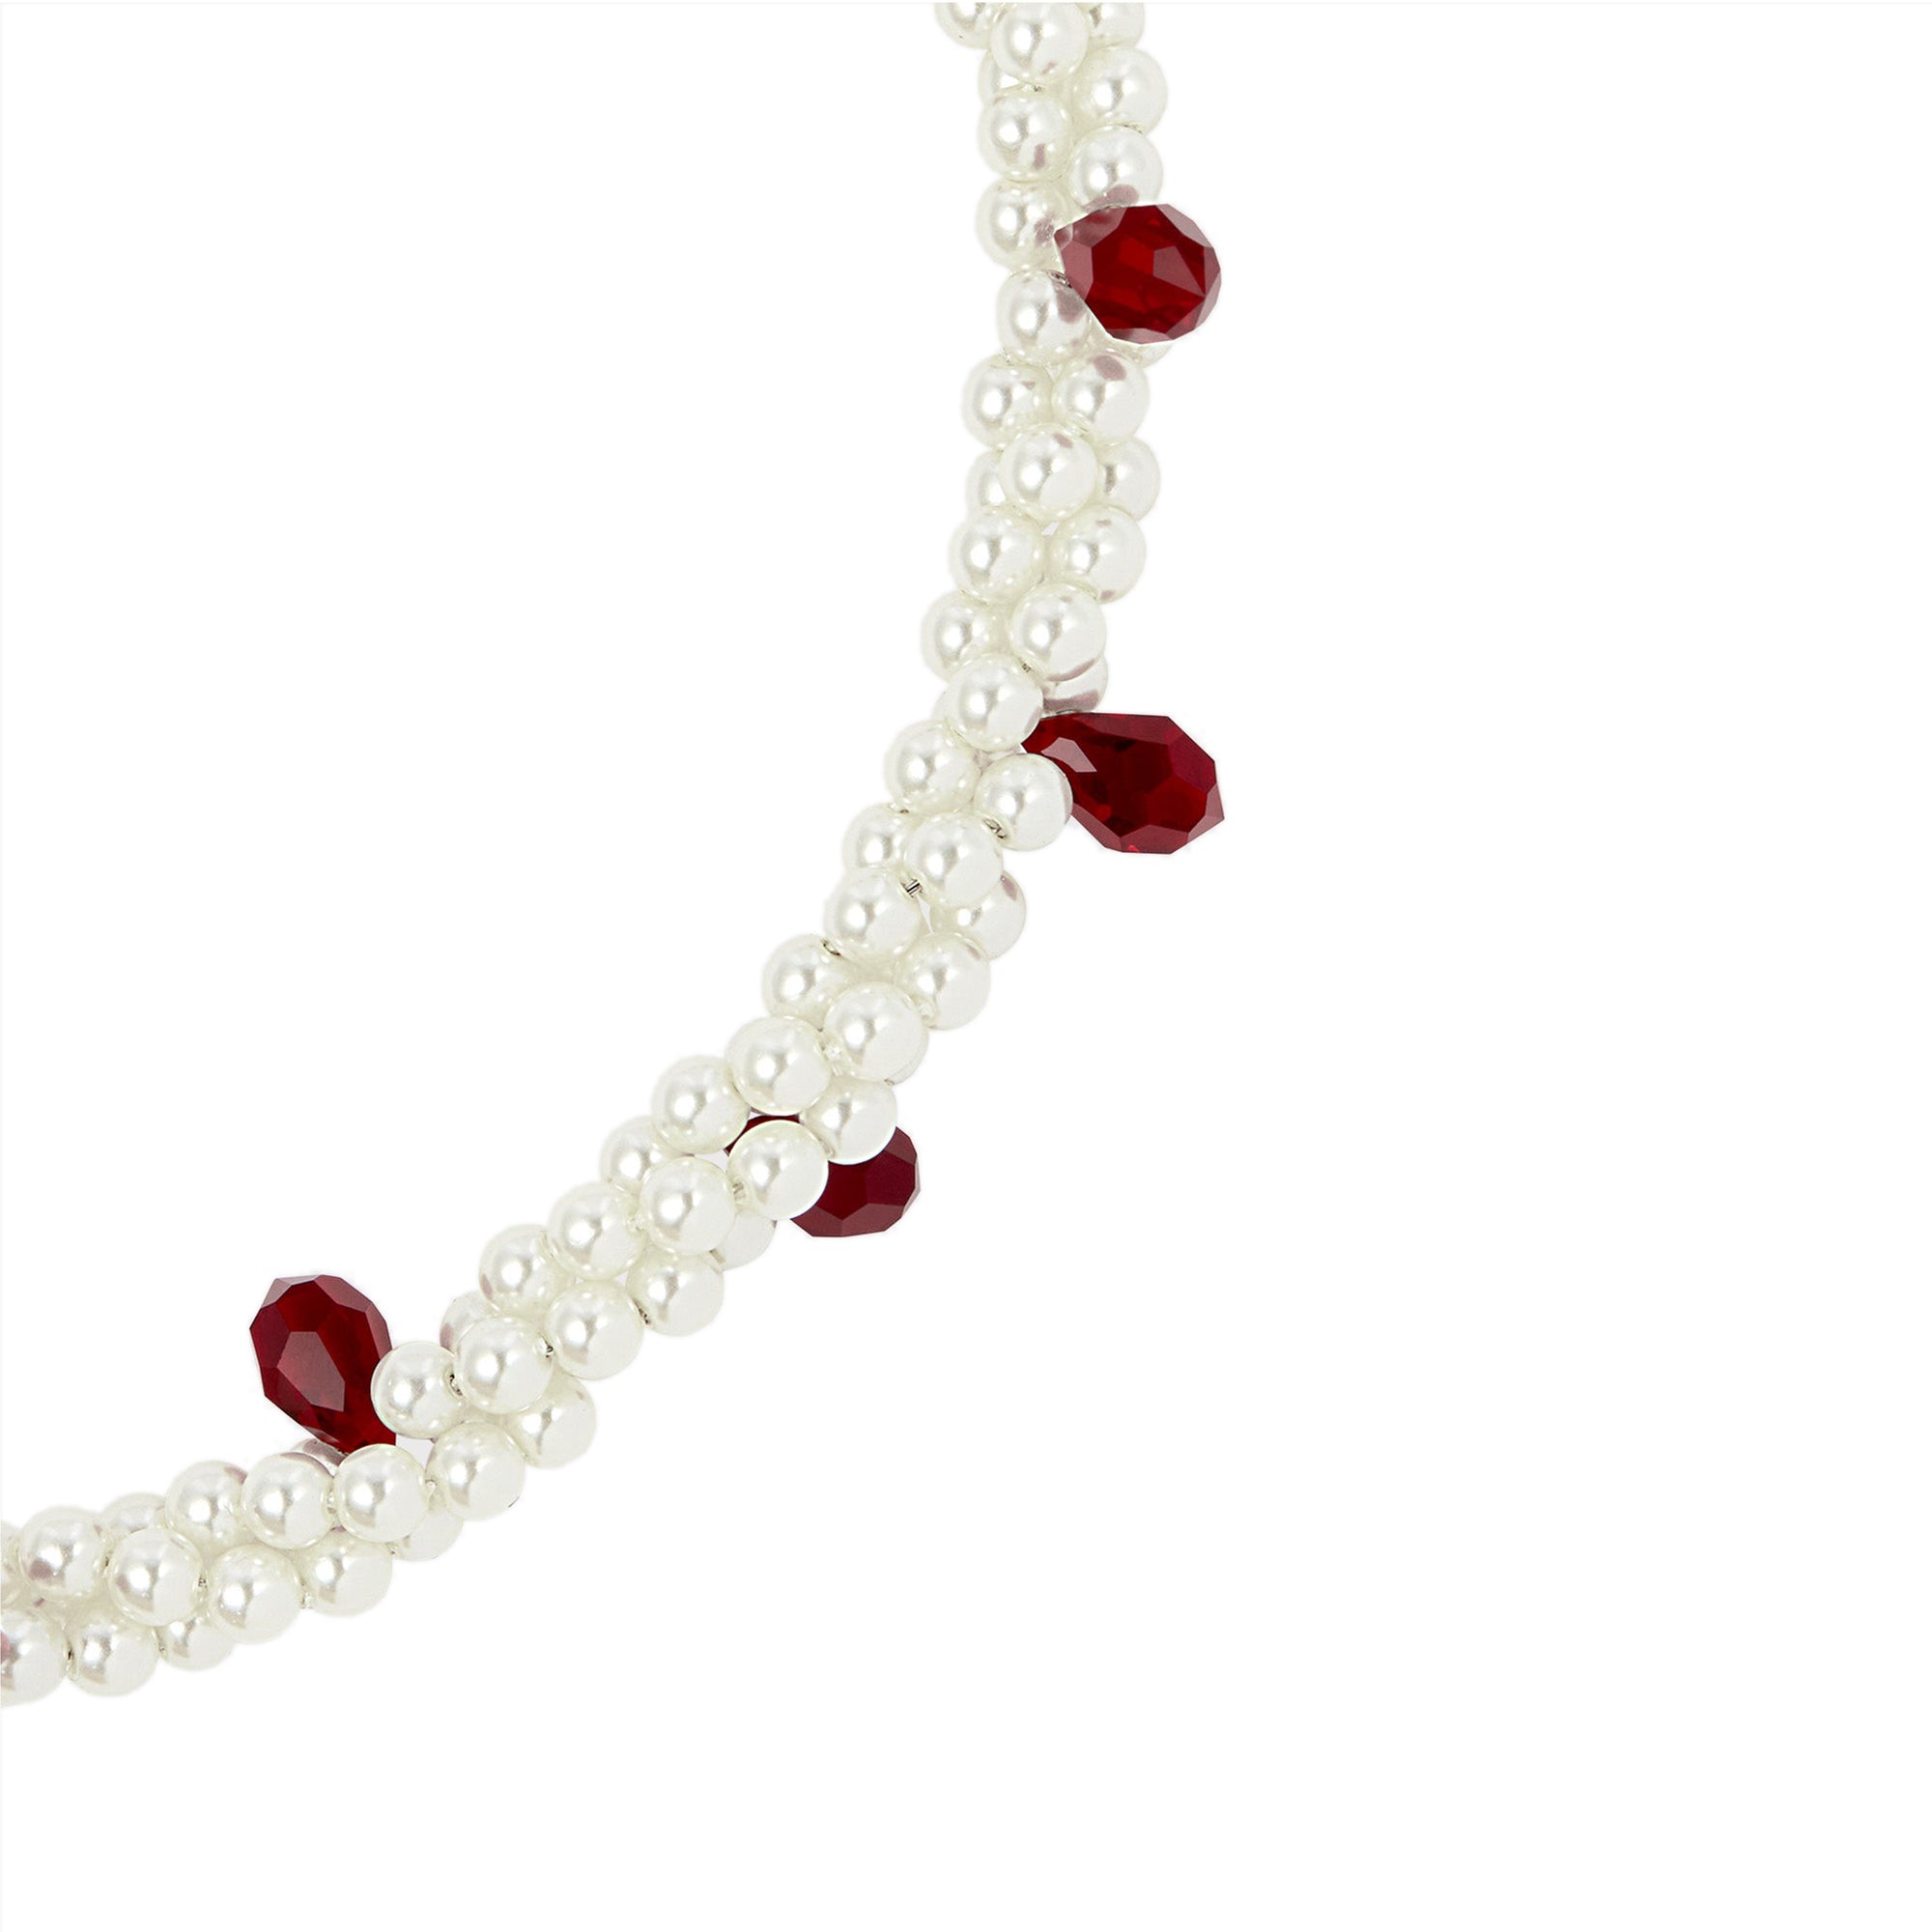 Simone Rocha - Women’s Twisted Necklace - (Pearl/Black) view 2